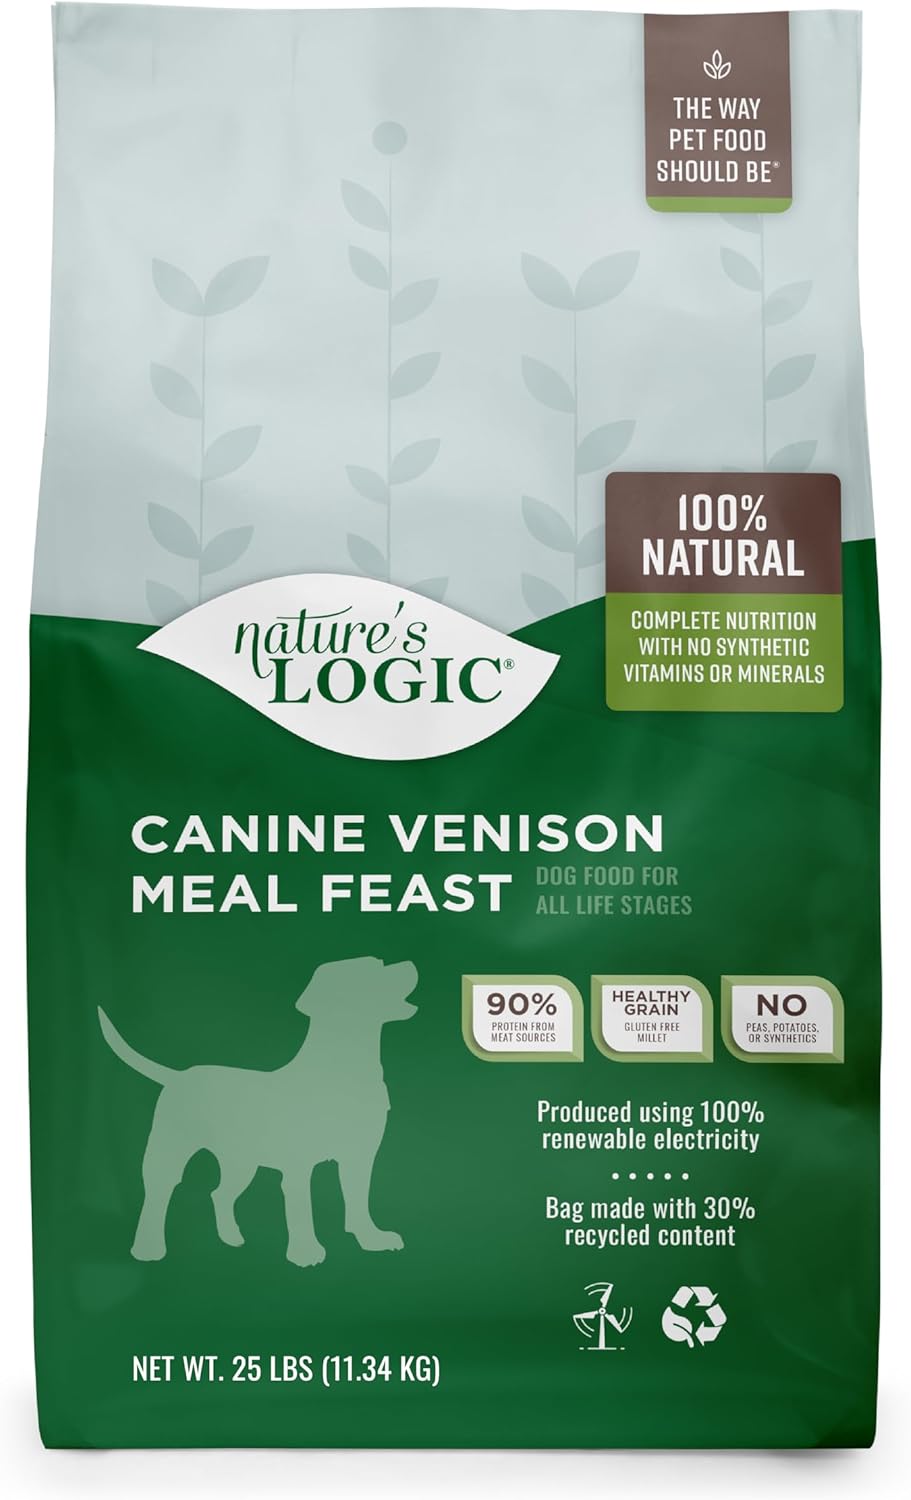 Nature’s Logic Canine Venison Meal Feast Dry Dog Food – Gallery Image 1